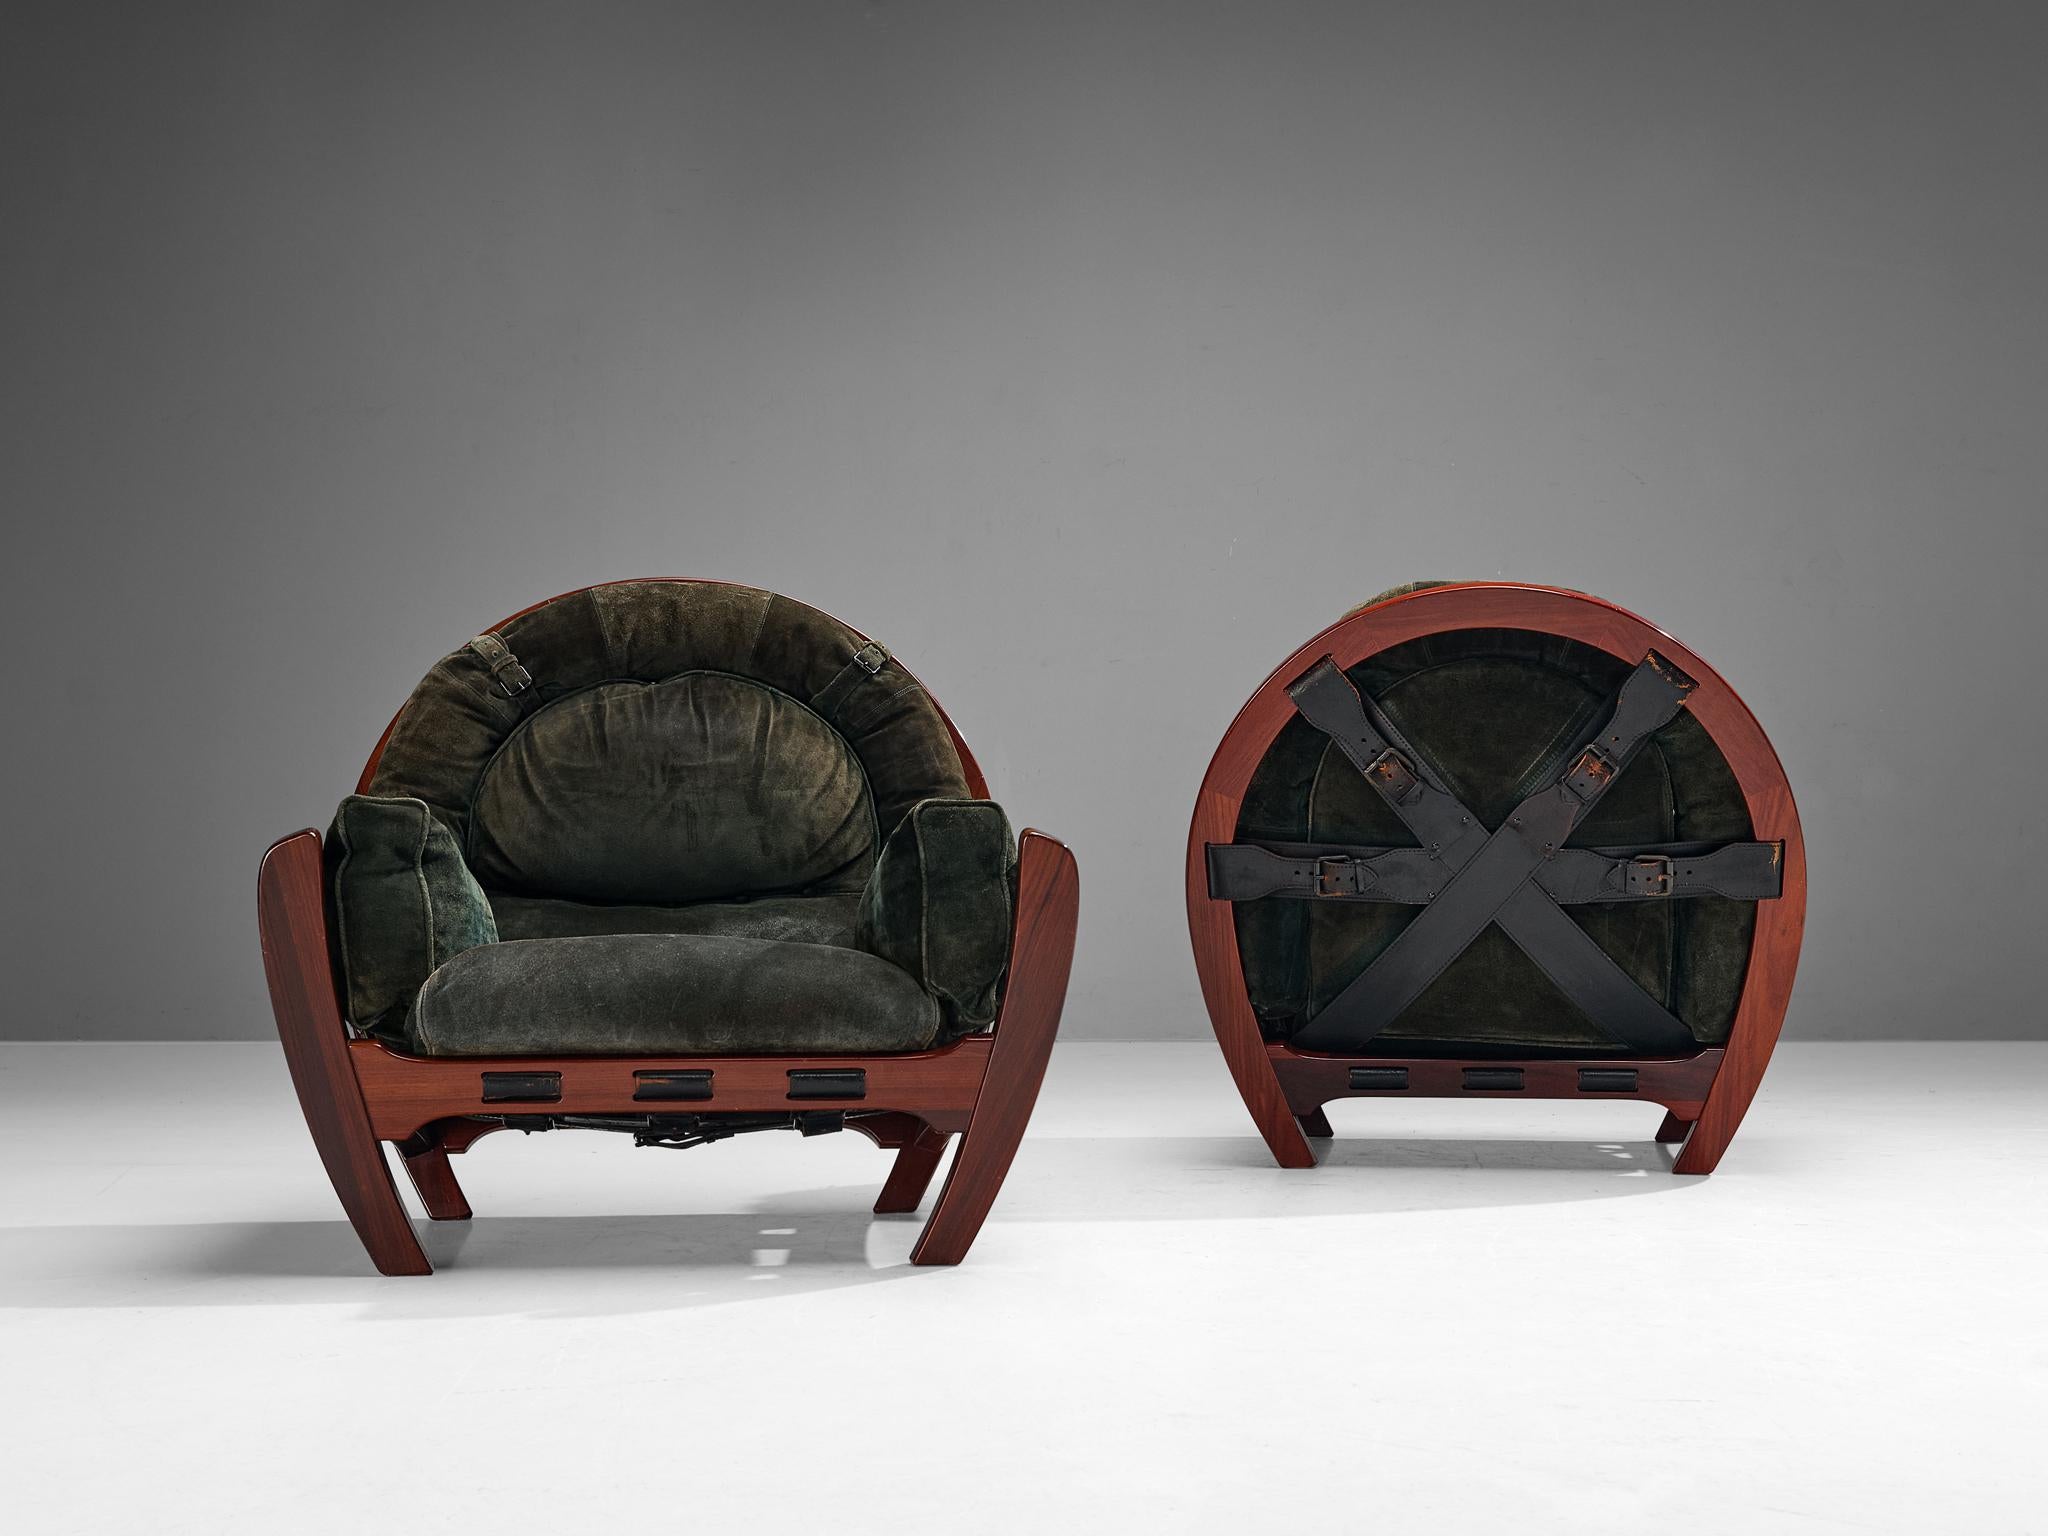  Luciano Frigerio Pair of 'Rancero' Lounge Chairs and Ottoman  1